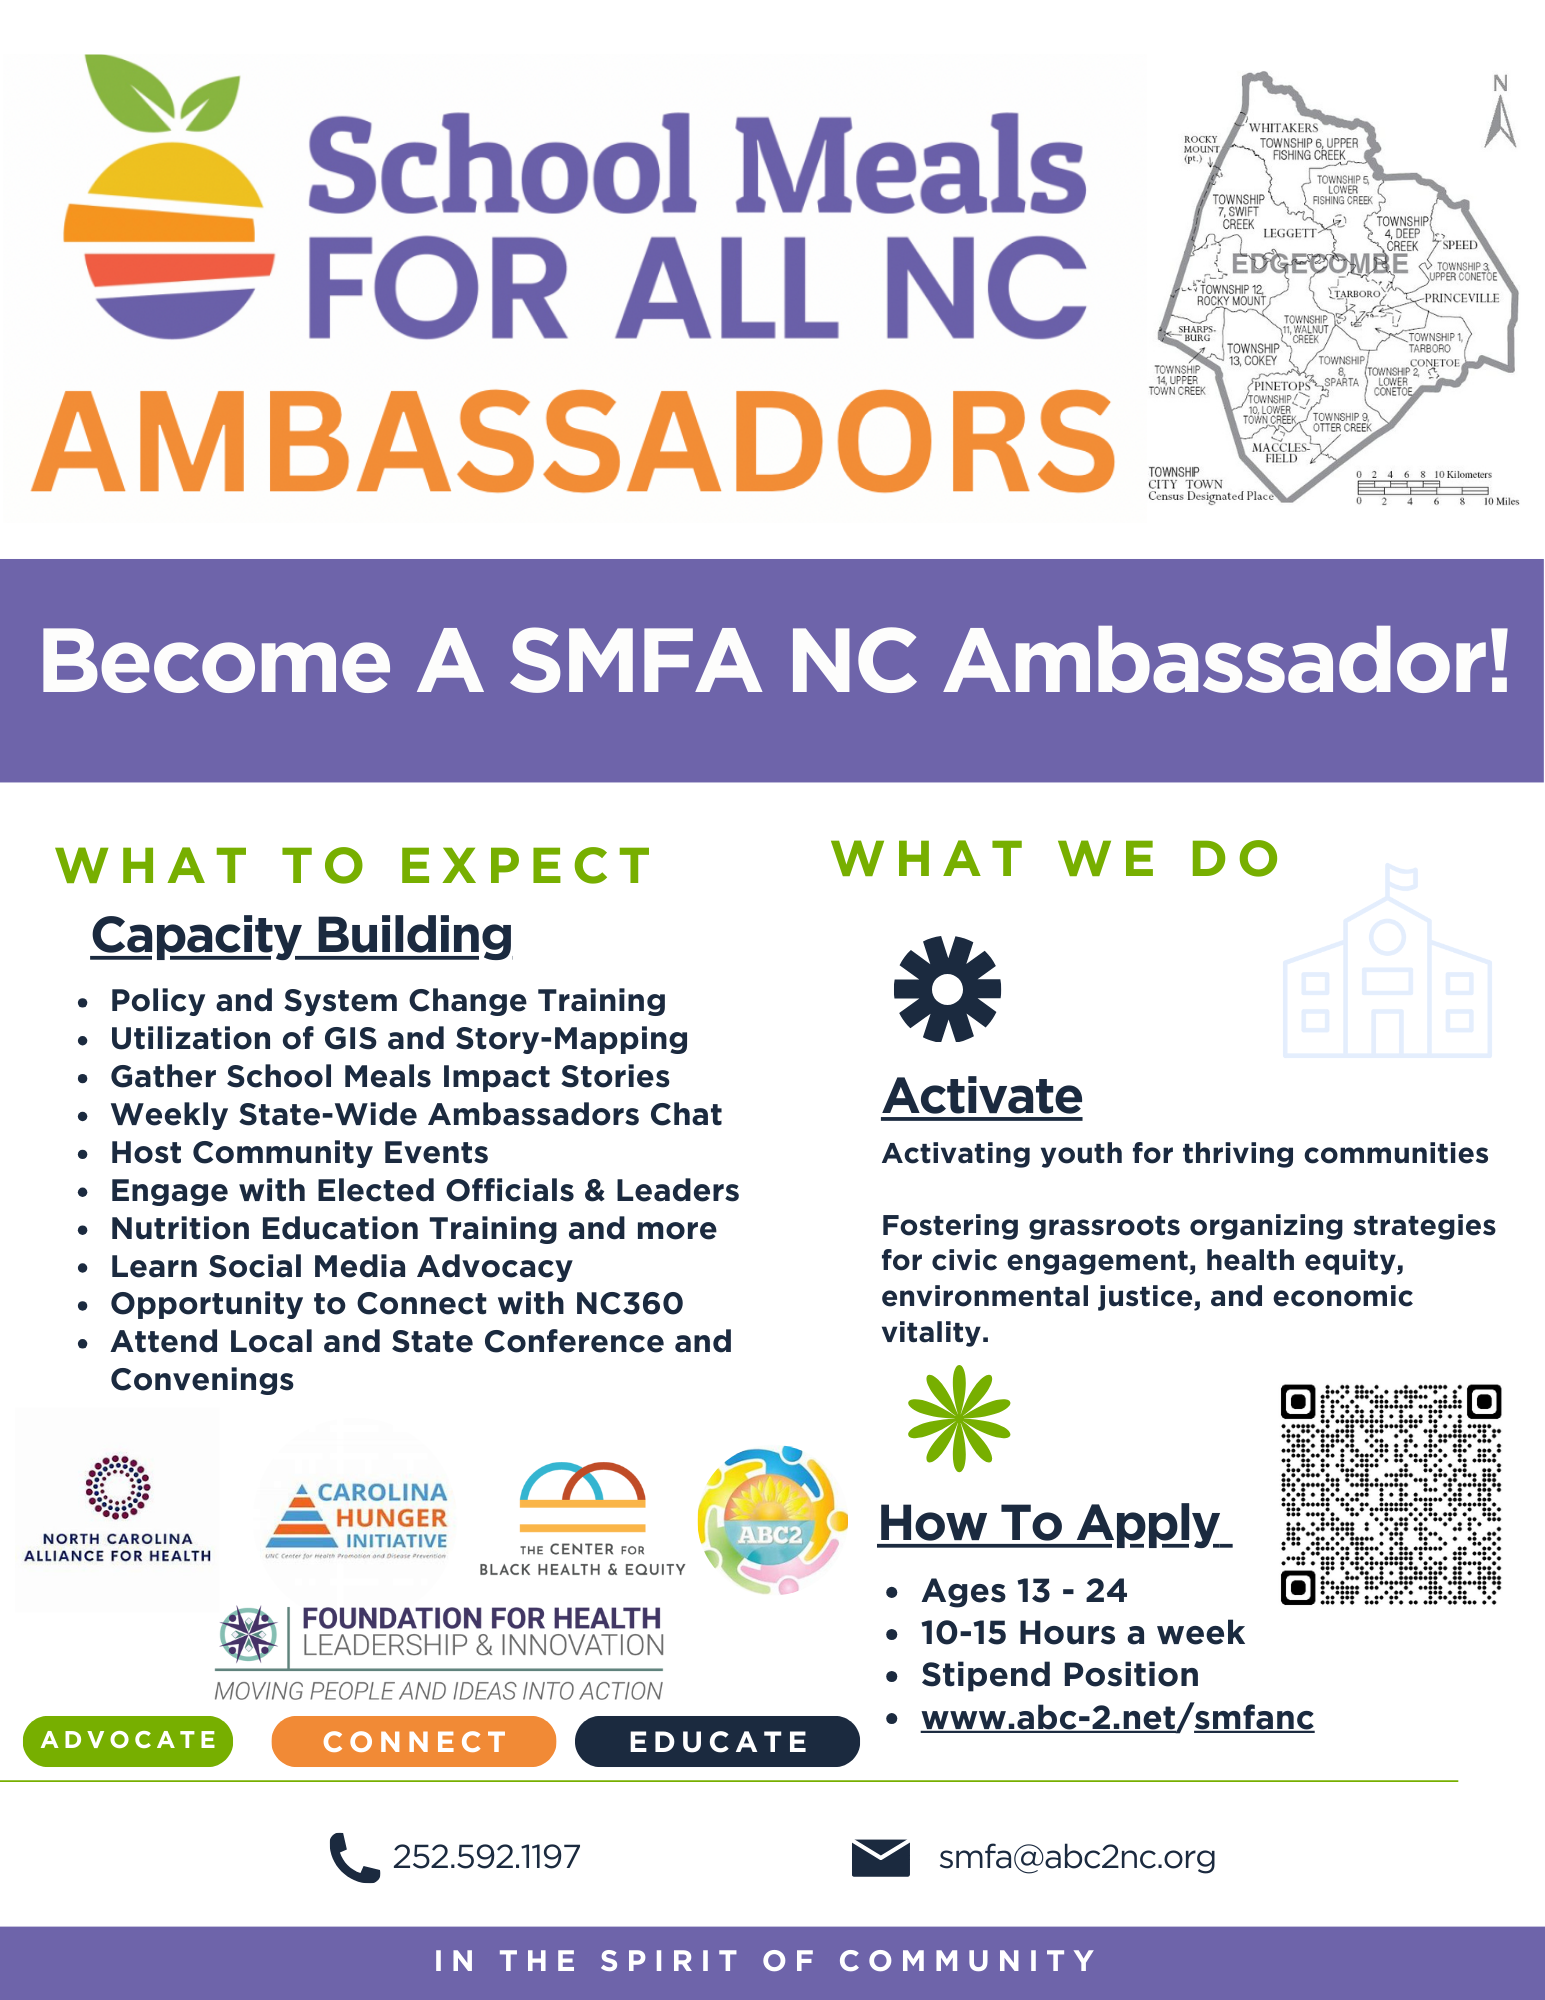 Become a SMFA NC Ambassador! Ages 13-24, 10-15 hours a week for a stipend position. How to Apply: abc-2.net/smfanc